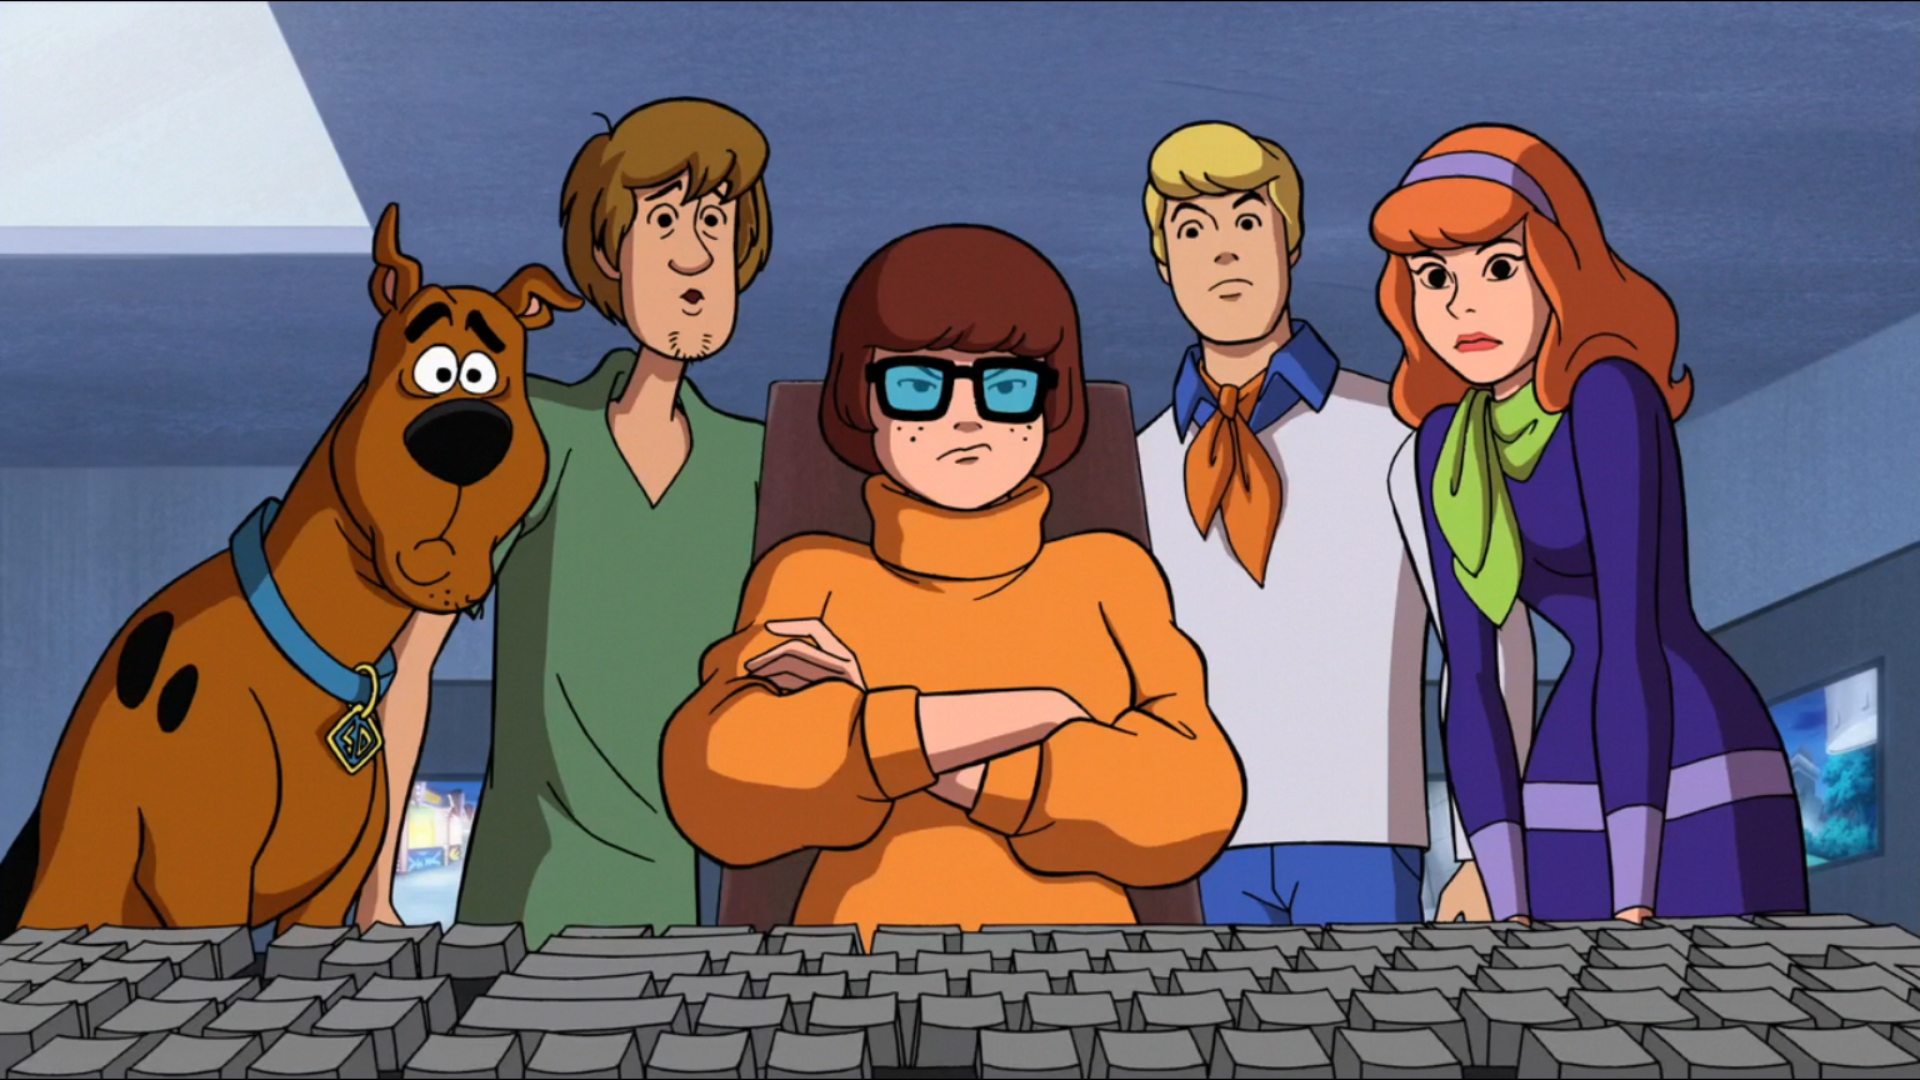 Scooby Doo Wallpaper HD APK for Android Download